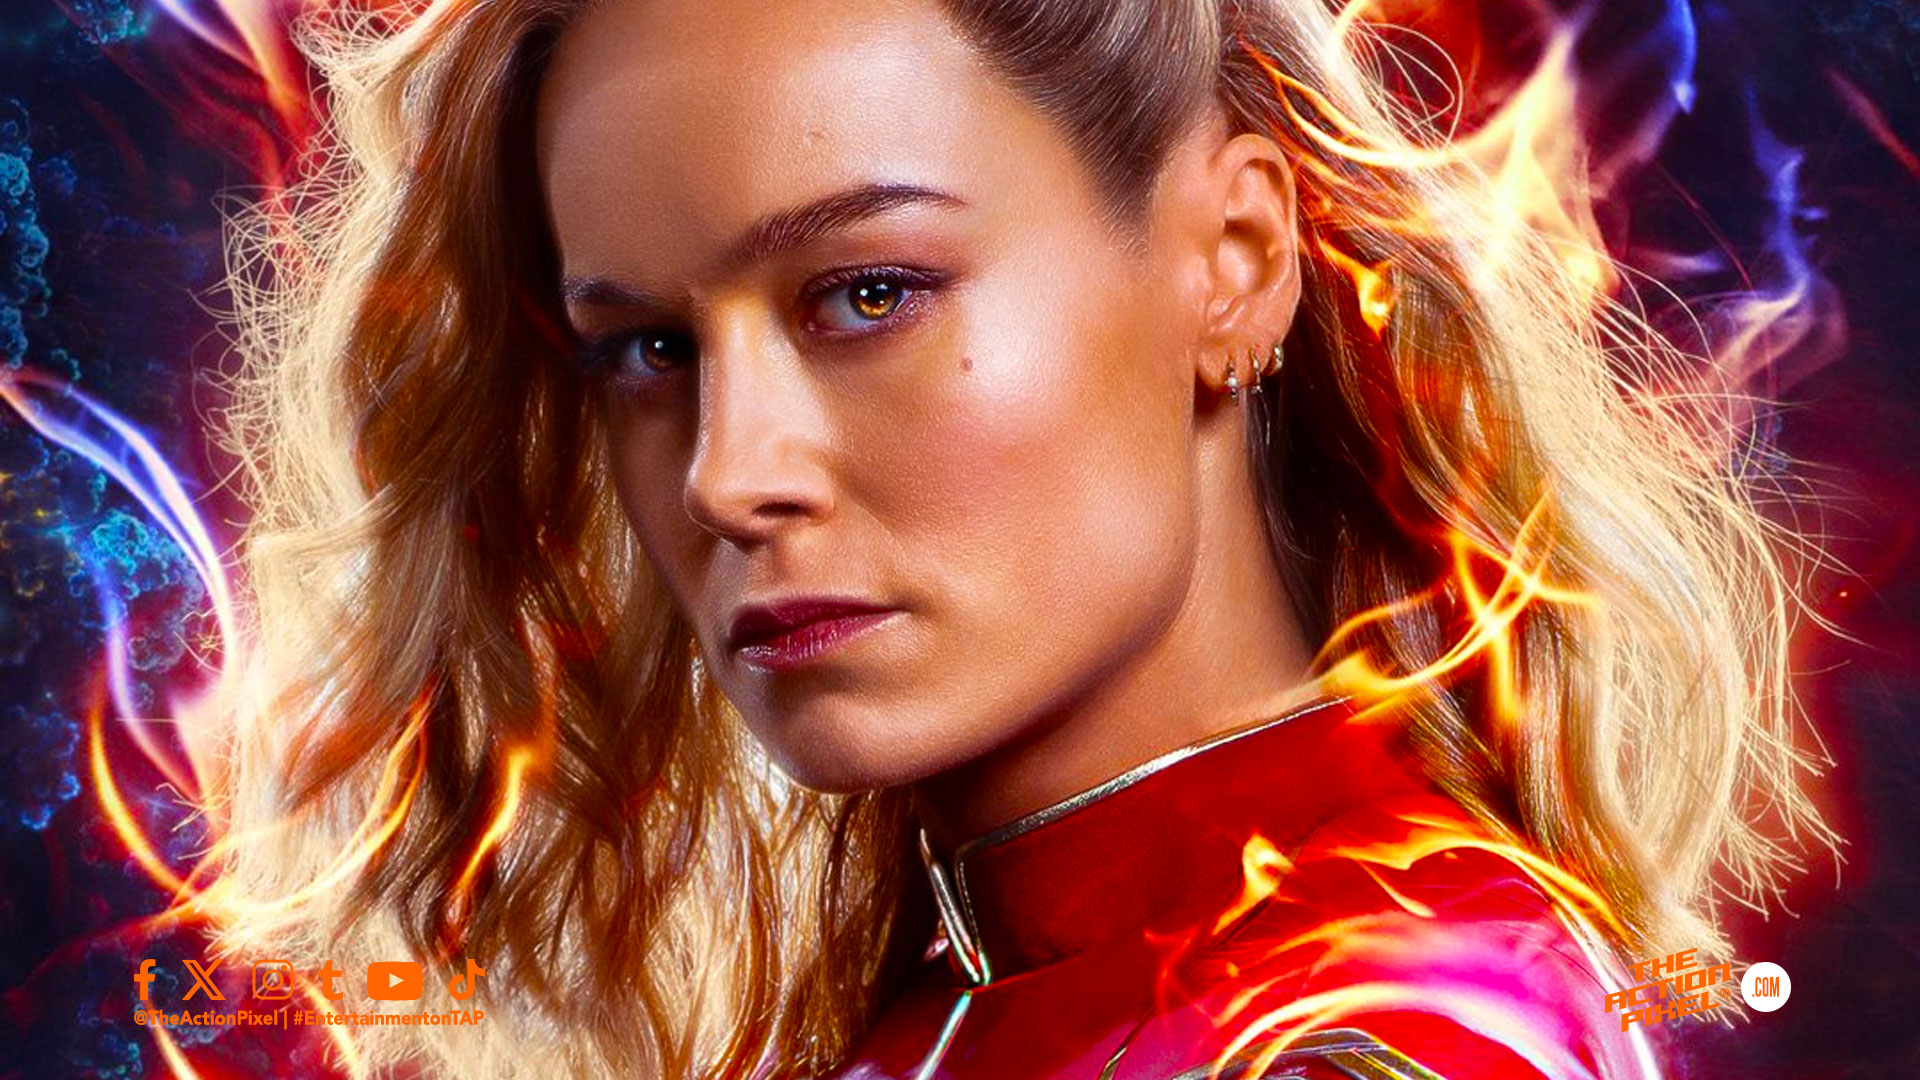 captain marvel, the marvels, the marvels movie,marvel studios, the marvels character poster, the marvels poster,brie larson, entertainment on tap, featured, THE ACTION PIXEL, goose, goose the cat,prince yan, nick fury, ms marvel, monica rambeau, carol danvers